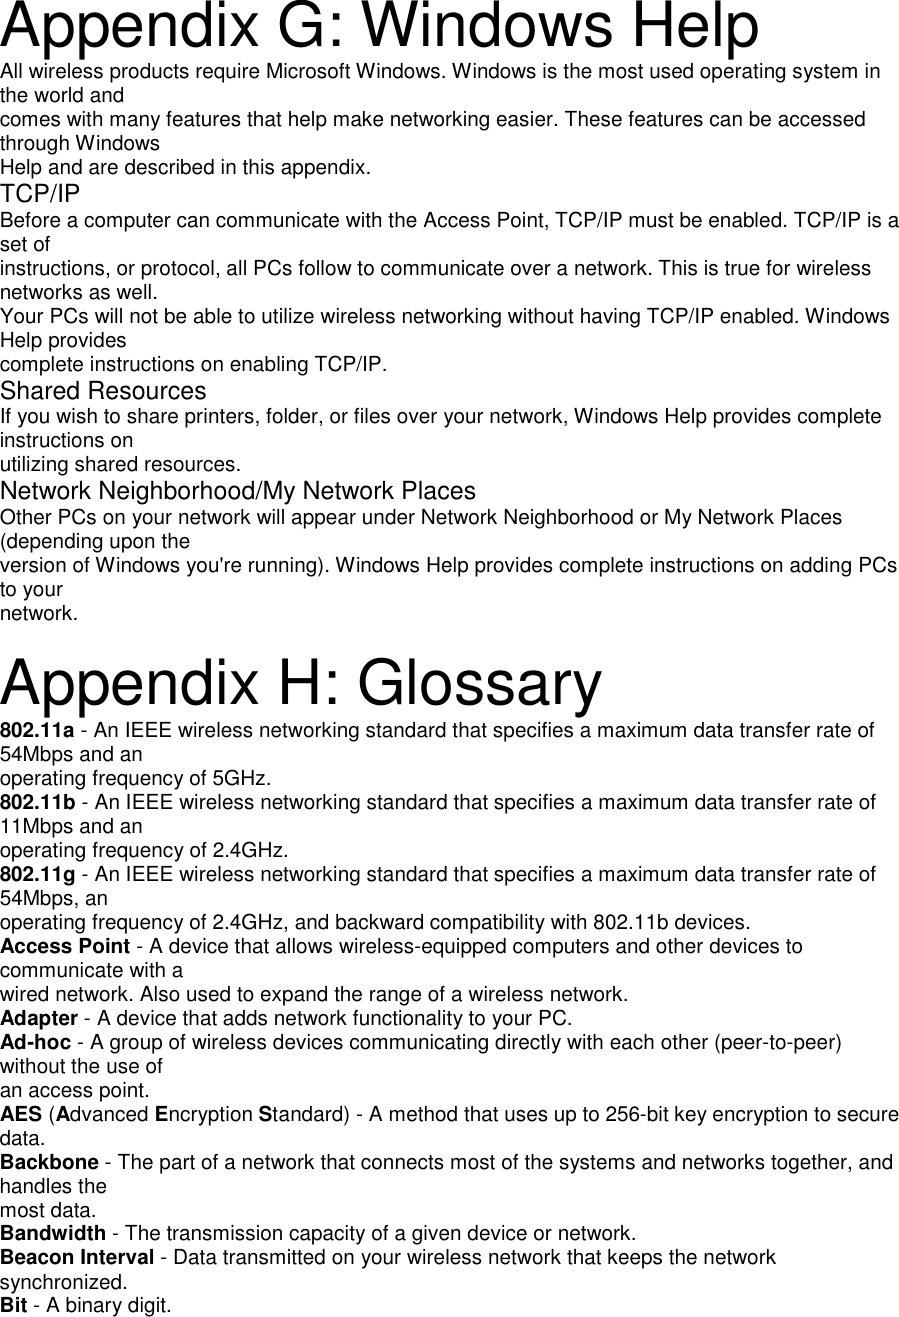 Appendix G: Windows HelpAll wireless products require Microsoft Windows. Windows is the most used operating system inthe world andcomes with many features that help make networking easier. These features can be accessedthrough WindowsHelp and are described in this appendix.TCP/IPBefore a computer can communicate with the Access Point, TCP/IP must be enabled. TCP/IP is aset ofinstructions, or protocol, all PCs follow to communicate over a network. This is true for wirelessnetworks as well.Your PCs will not be able to utilize wireless networking without having TCP/IP enabled. WindowsHelp providescomplete instructions on enabling TCP/IP.Shared ResourcesIf you wish to share printers, folder, or files over your network, Windows Help provides completeinstructions onutilizing shared resources.Network Neighborhood/My Network PlacesOther PCs on your network will appear under Network Neighborhood or My Network Places(depending upon theversion of Windows you&apos;re running). Windows Help provides complete instructions on adding PCsto yournetwork.Appendix H: Glossary802.11a - An IEEE wireless networking standard that specifies a maximum data transfer rate of54Mbps and anoperating frequency of 5GHz.802.11b - An IEEE wireless networking standard that specifies a maximum data transfer rate of11Mbps and anoperating frequency of 2.4GHz.802.11g - An IEEE wireless networking standard that specifies a maximum data transfer rate of54Mbps, anoperating frequency of 2.4GHz, and backward compatibility with 802.11b devices.Access Point - A device that allows wireless-equipped computers and other devices tocommunicate with awired network. Also used to expand the range of a wireless network.Adapter - A device that adds network functionality to your PC.Ad-hoc - A group of wireless devices communicating directly with each other (peer-to-peer)without the use ofan access point.AES (Advanced Encryption Standard) - A method that uses up to 256-bit key encryption to securedata.Backbone - The part of a network that connects most of the systems and networks together, andhandles themost data.Bandwidth - The transmission capacity of a given device or network.Beacon Interval - Data transmitted on your wireless network that keeps the networksynchronized.Bit - A binary digit.